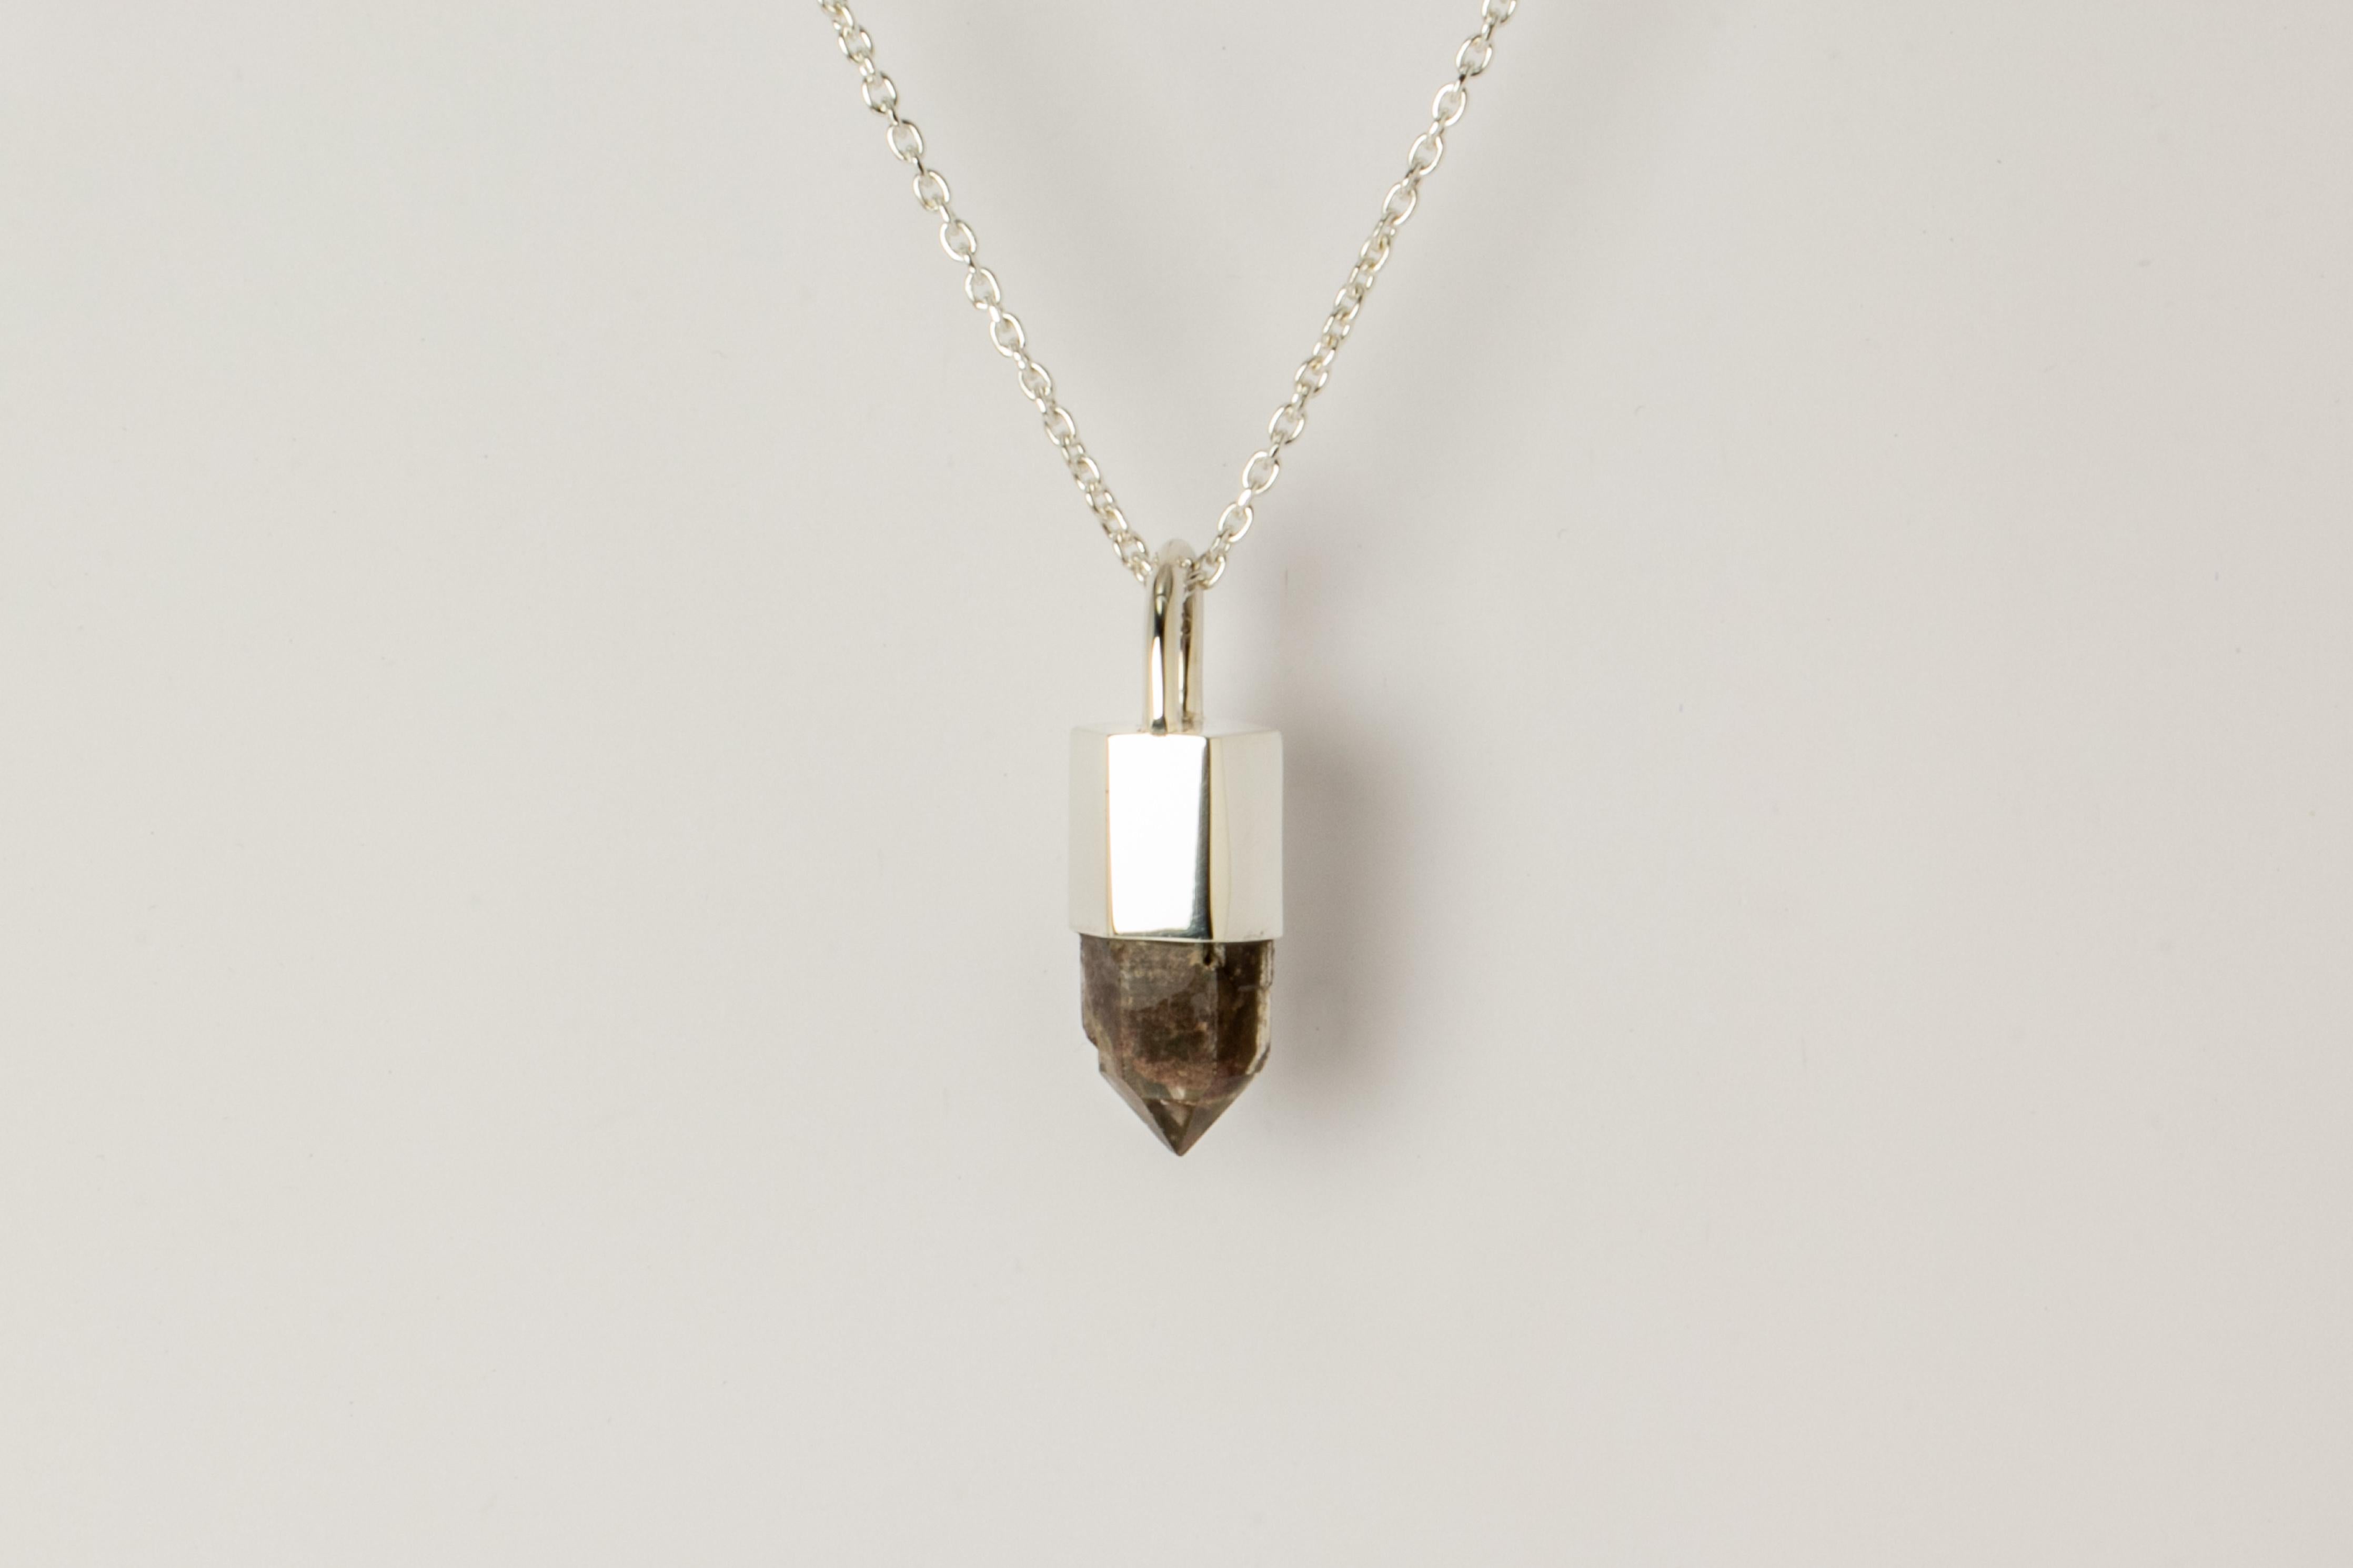 Pendant necklace made in polished sterling silver and a Garden Quartz. It comes on 74 cm sterling silver chain.
The Talisman series is an exploration into the power of natural crystals. The crystals used in these pieces are discovered through